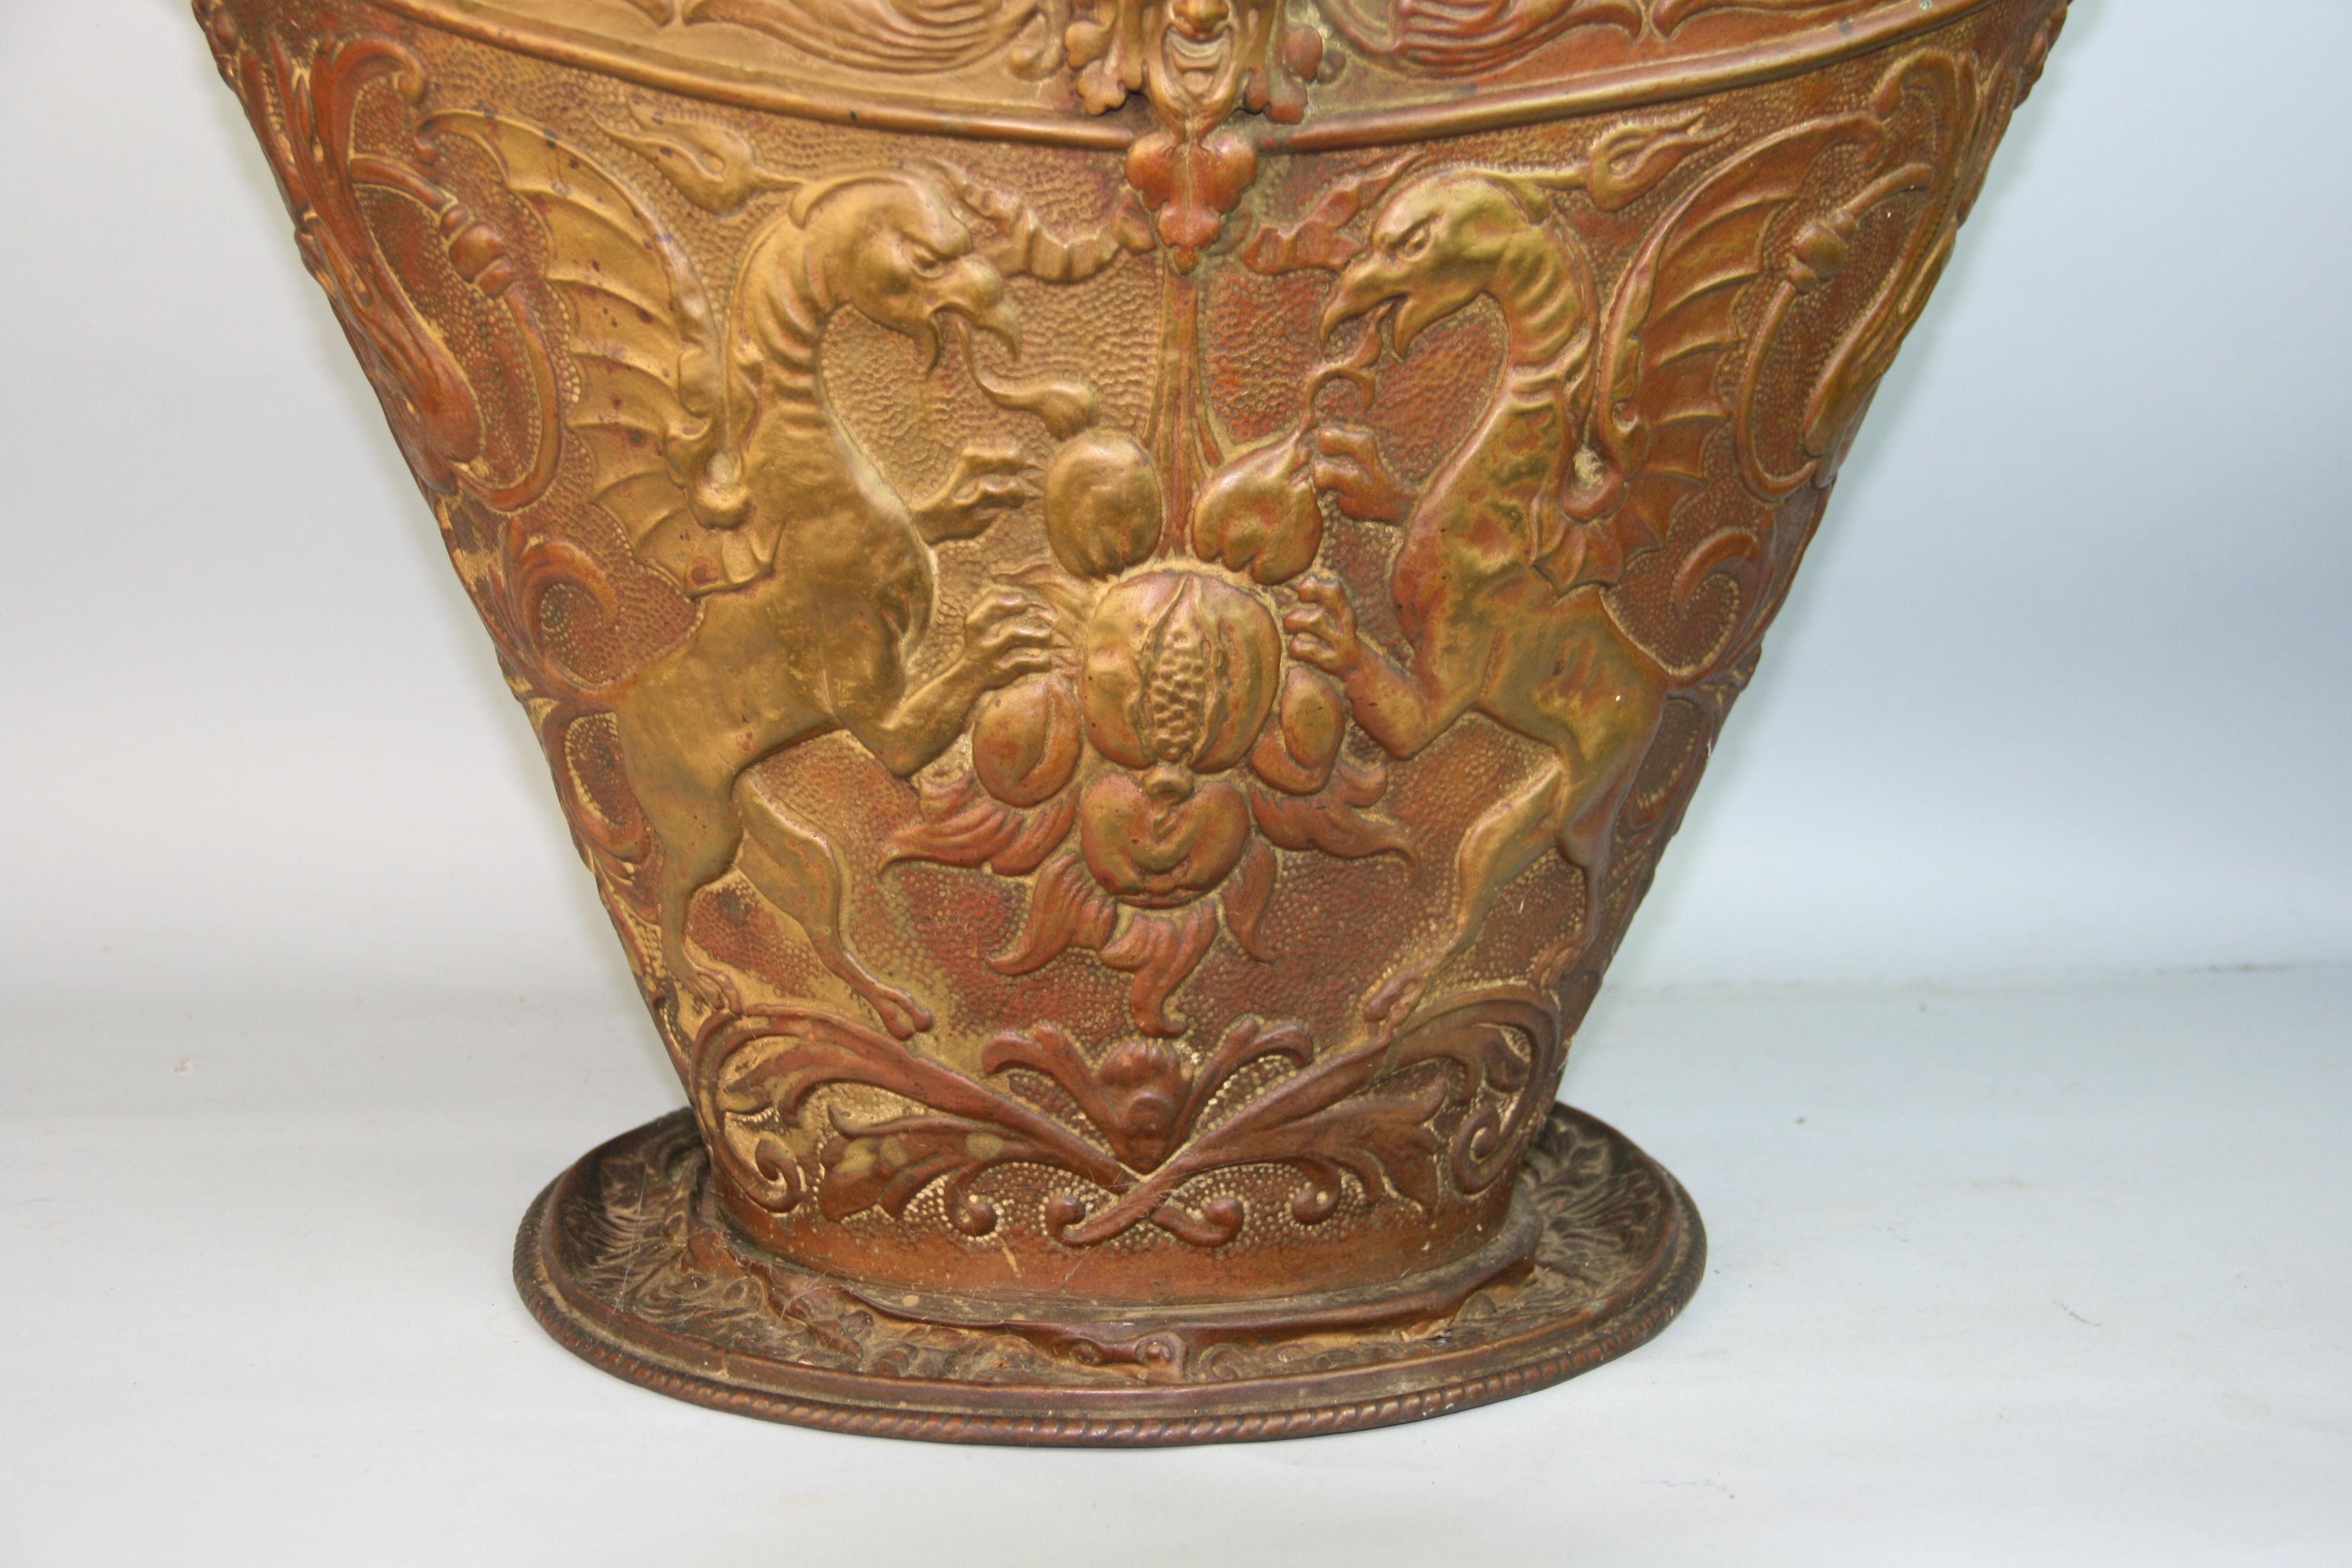 Victorian Embossed Coal/Wood Bucket Brass/Metal Late 19th Century For Sale 3